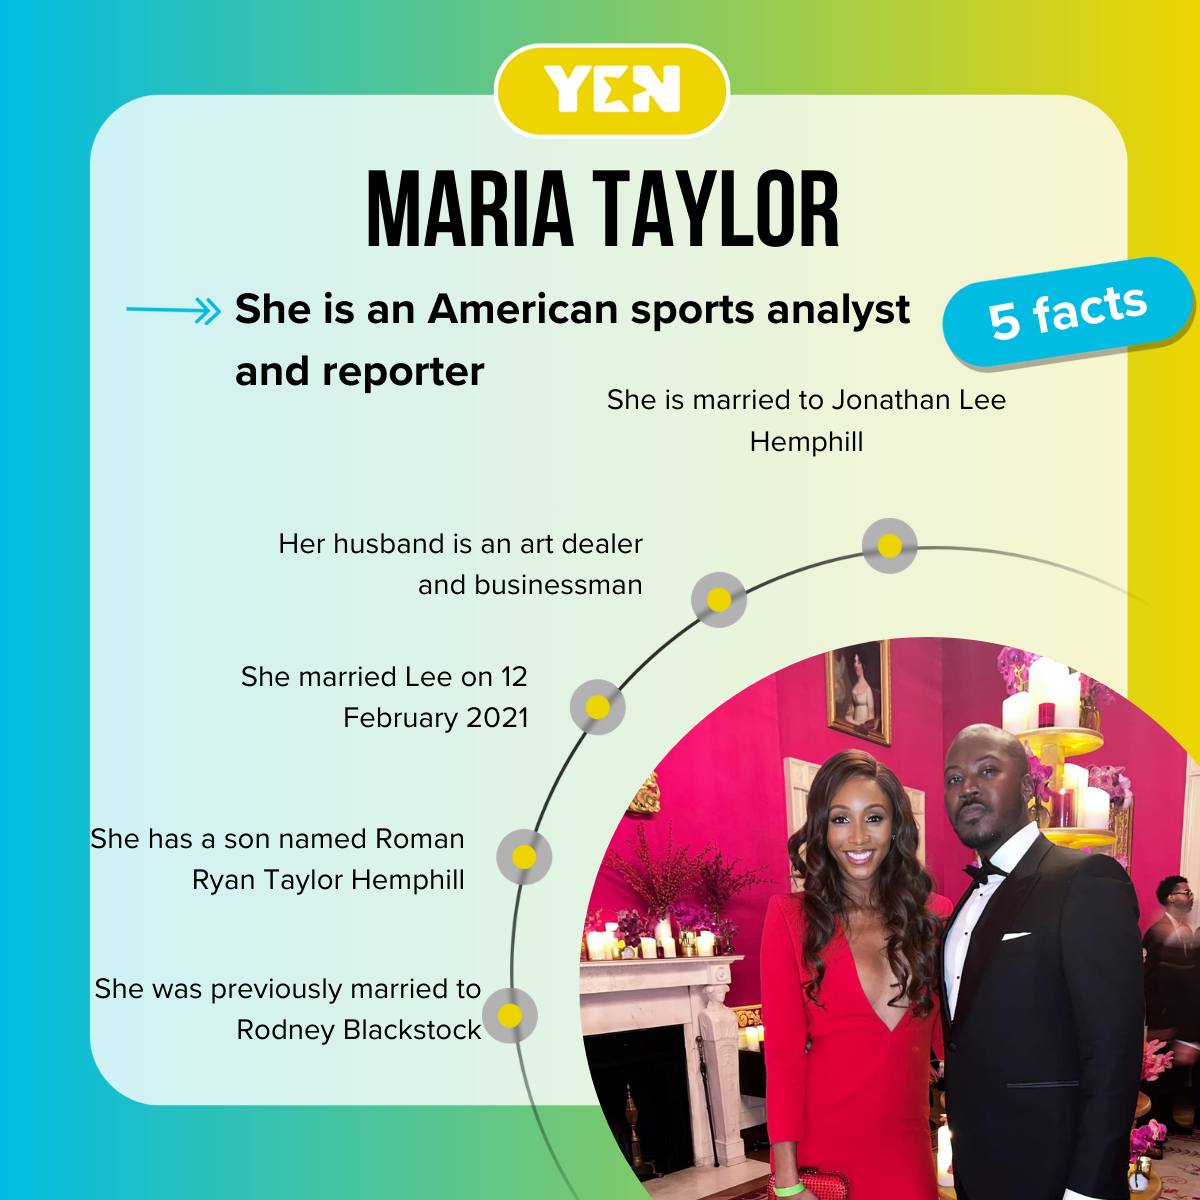 Facts about Maria Taylor